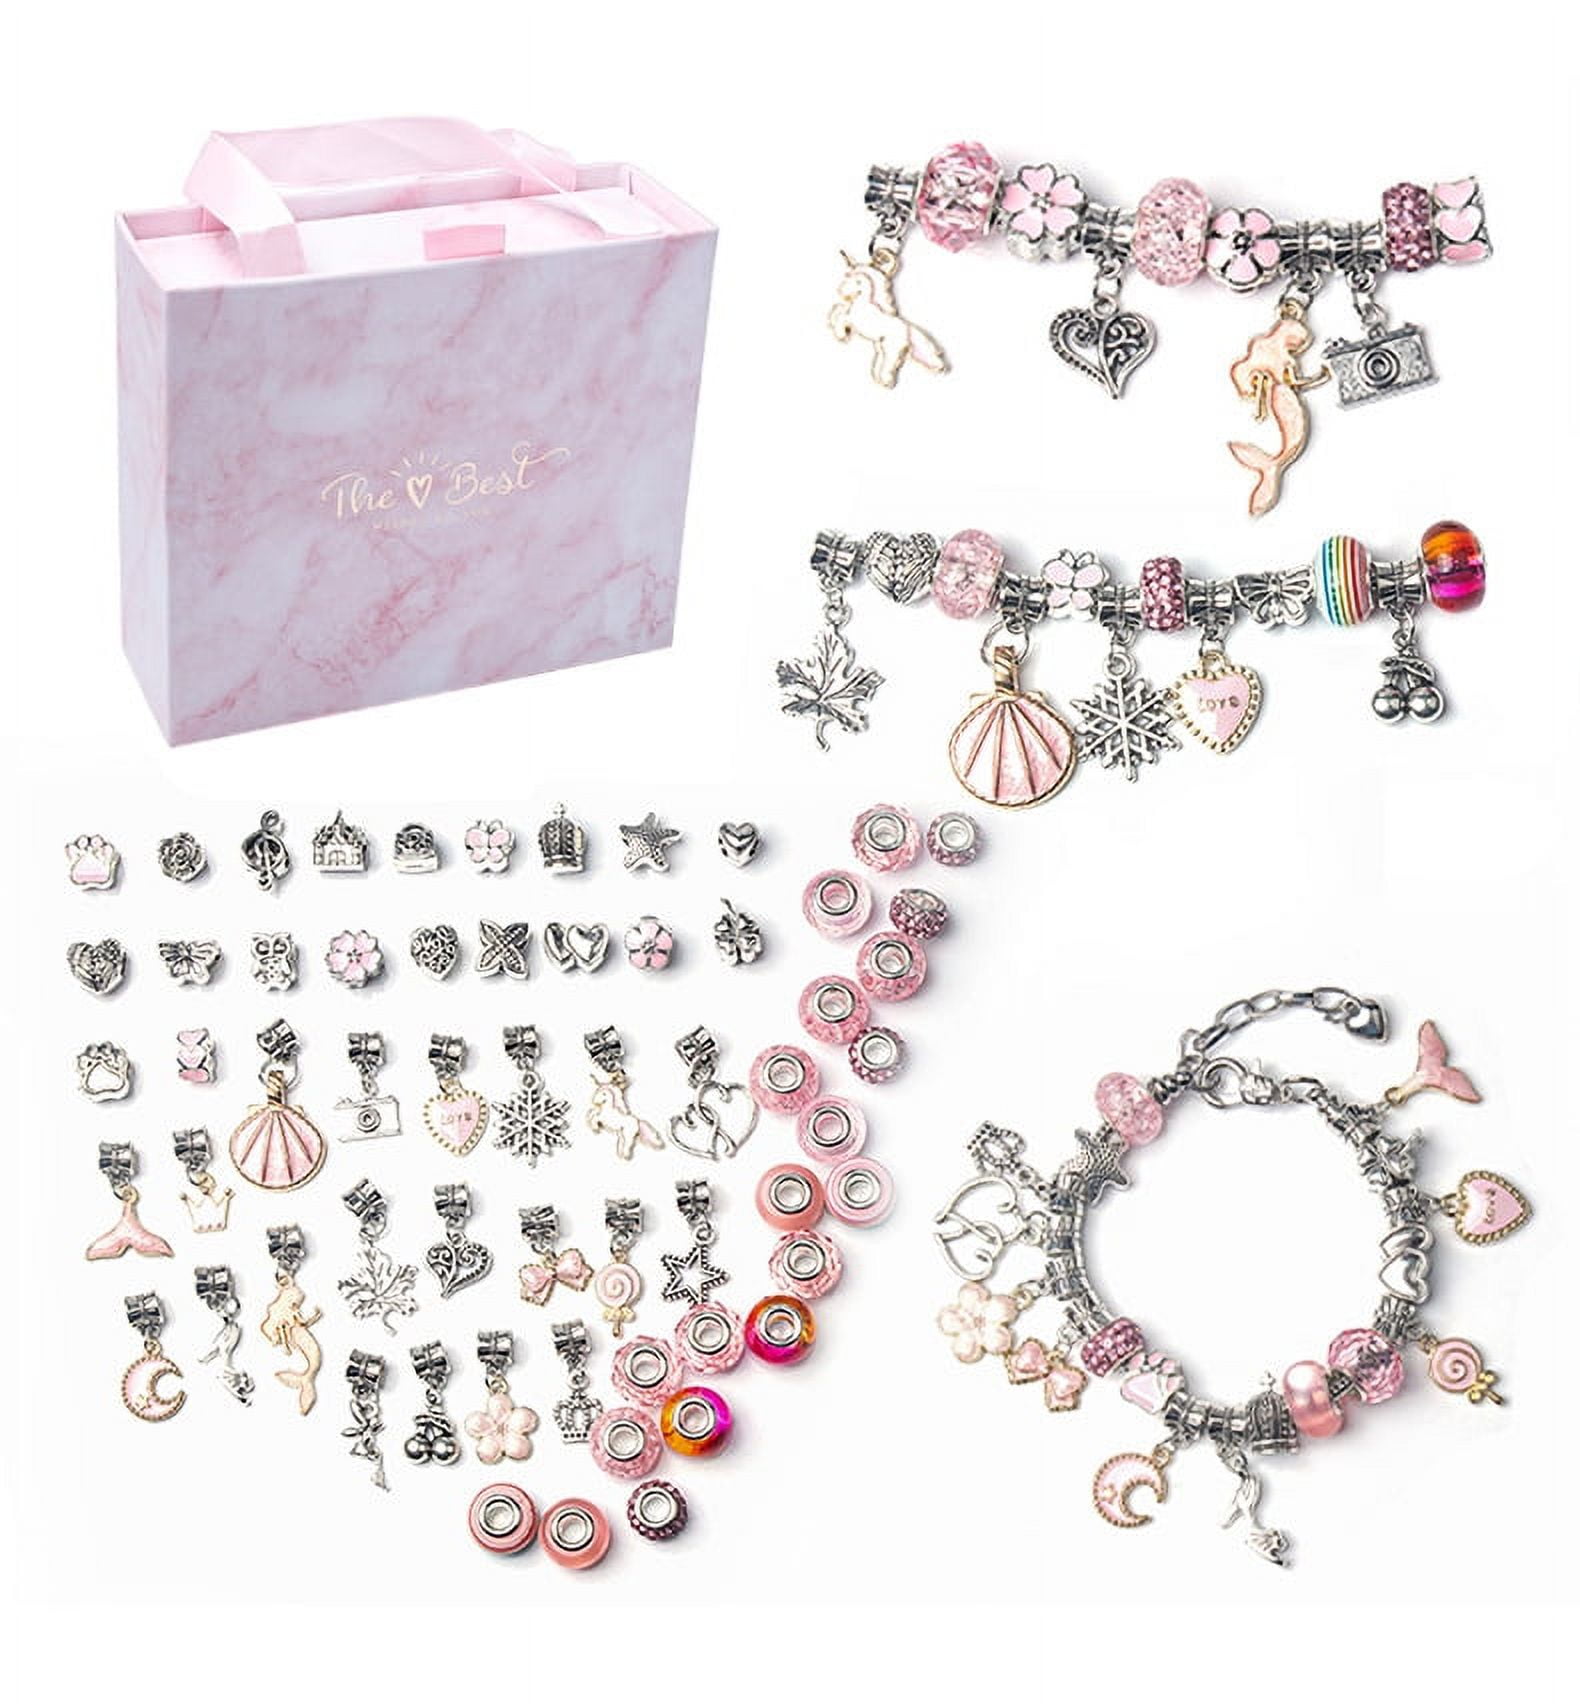 Bracelet Charms for Jewelry Making, DIY Kit Set Cute Jewelry 3D Beads  Birthday Christmas Graduation Gift for Women Girls